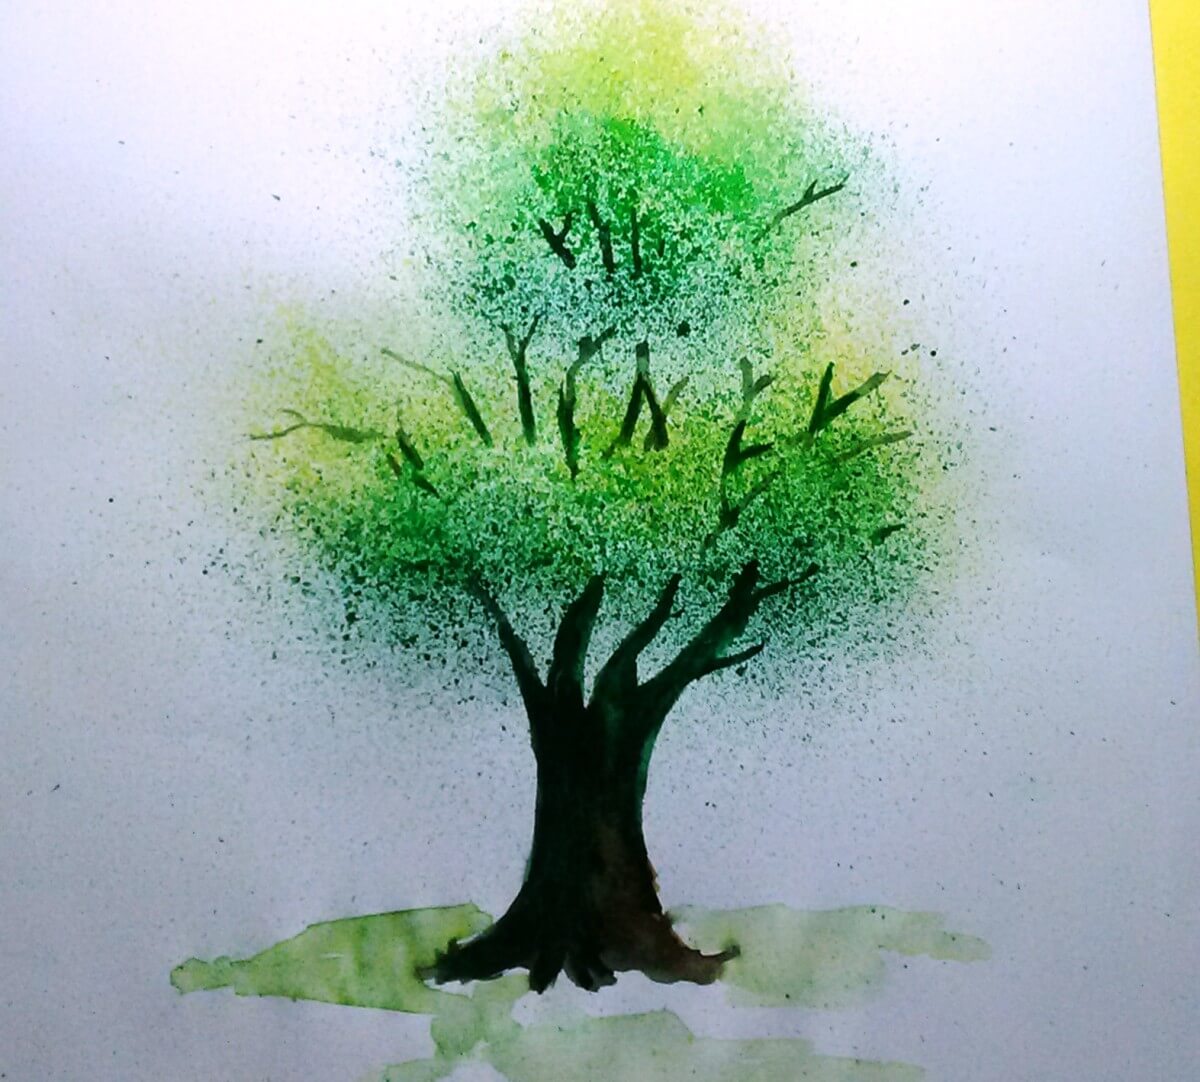 Amazing Tree Craft Using Spray Technique From Toothbrush Easy Spray Painting Art Ideas With Toothbrush